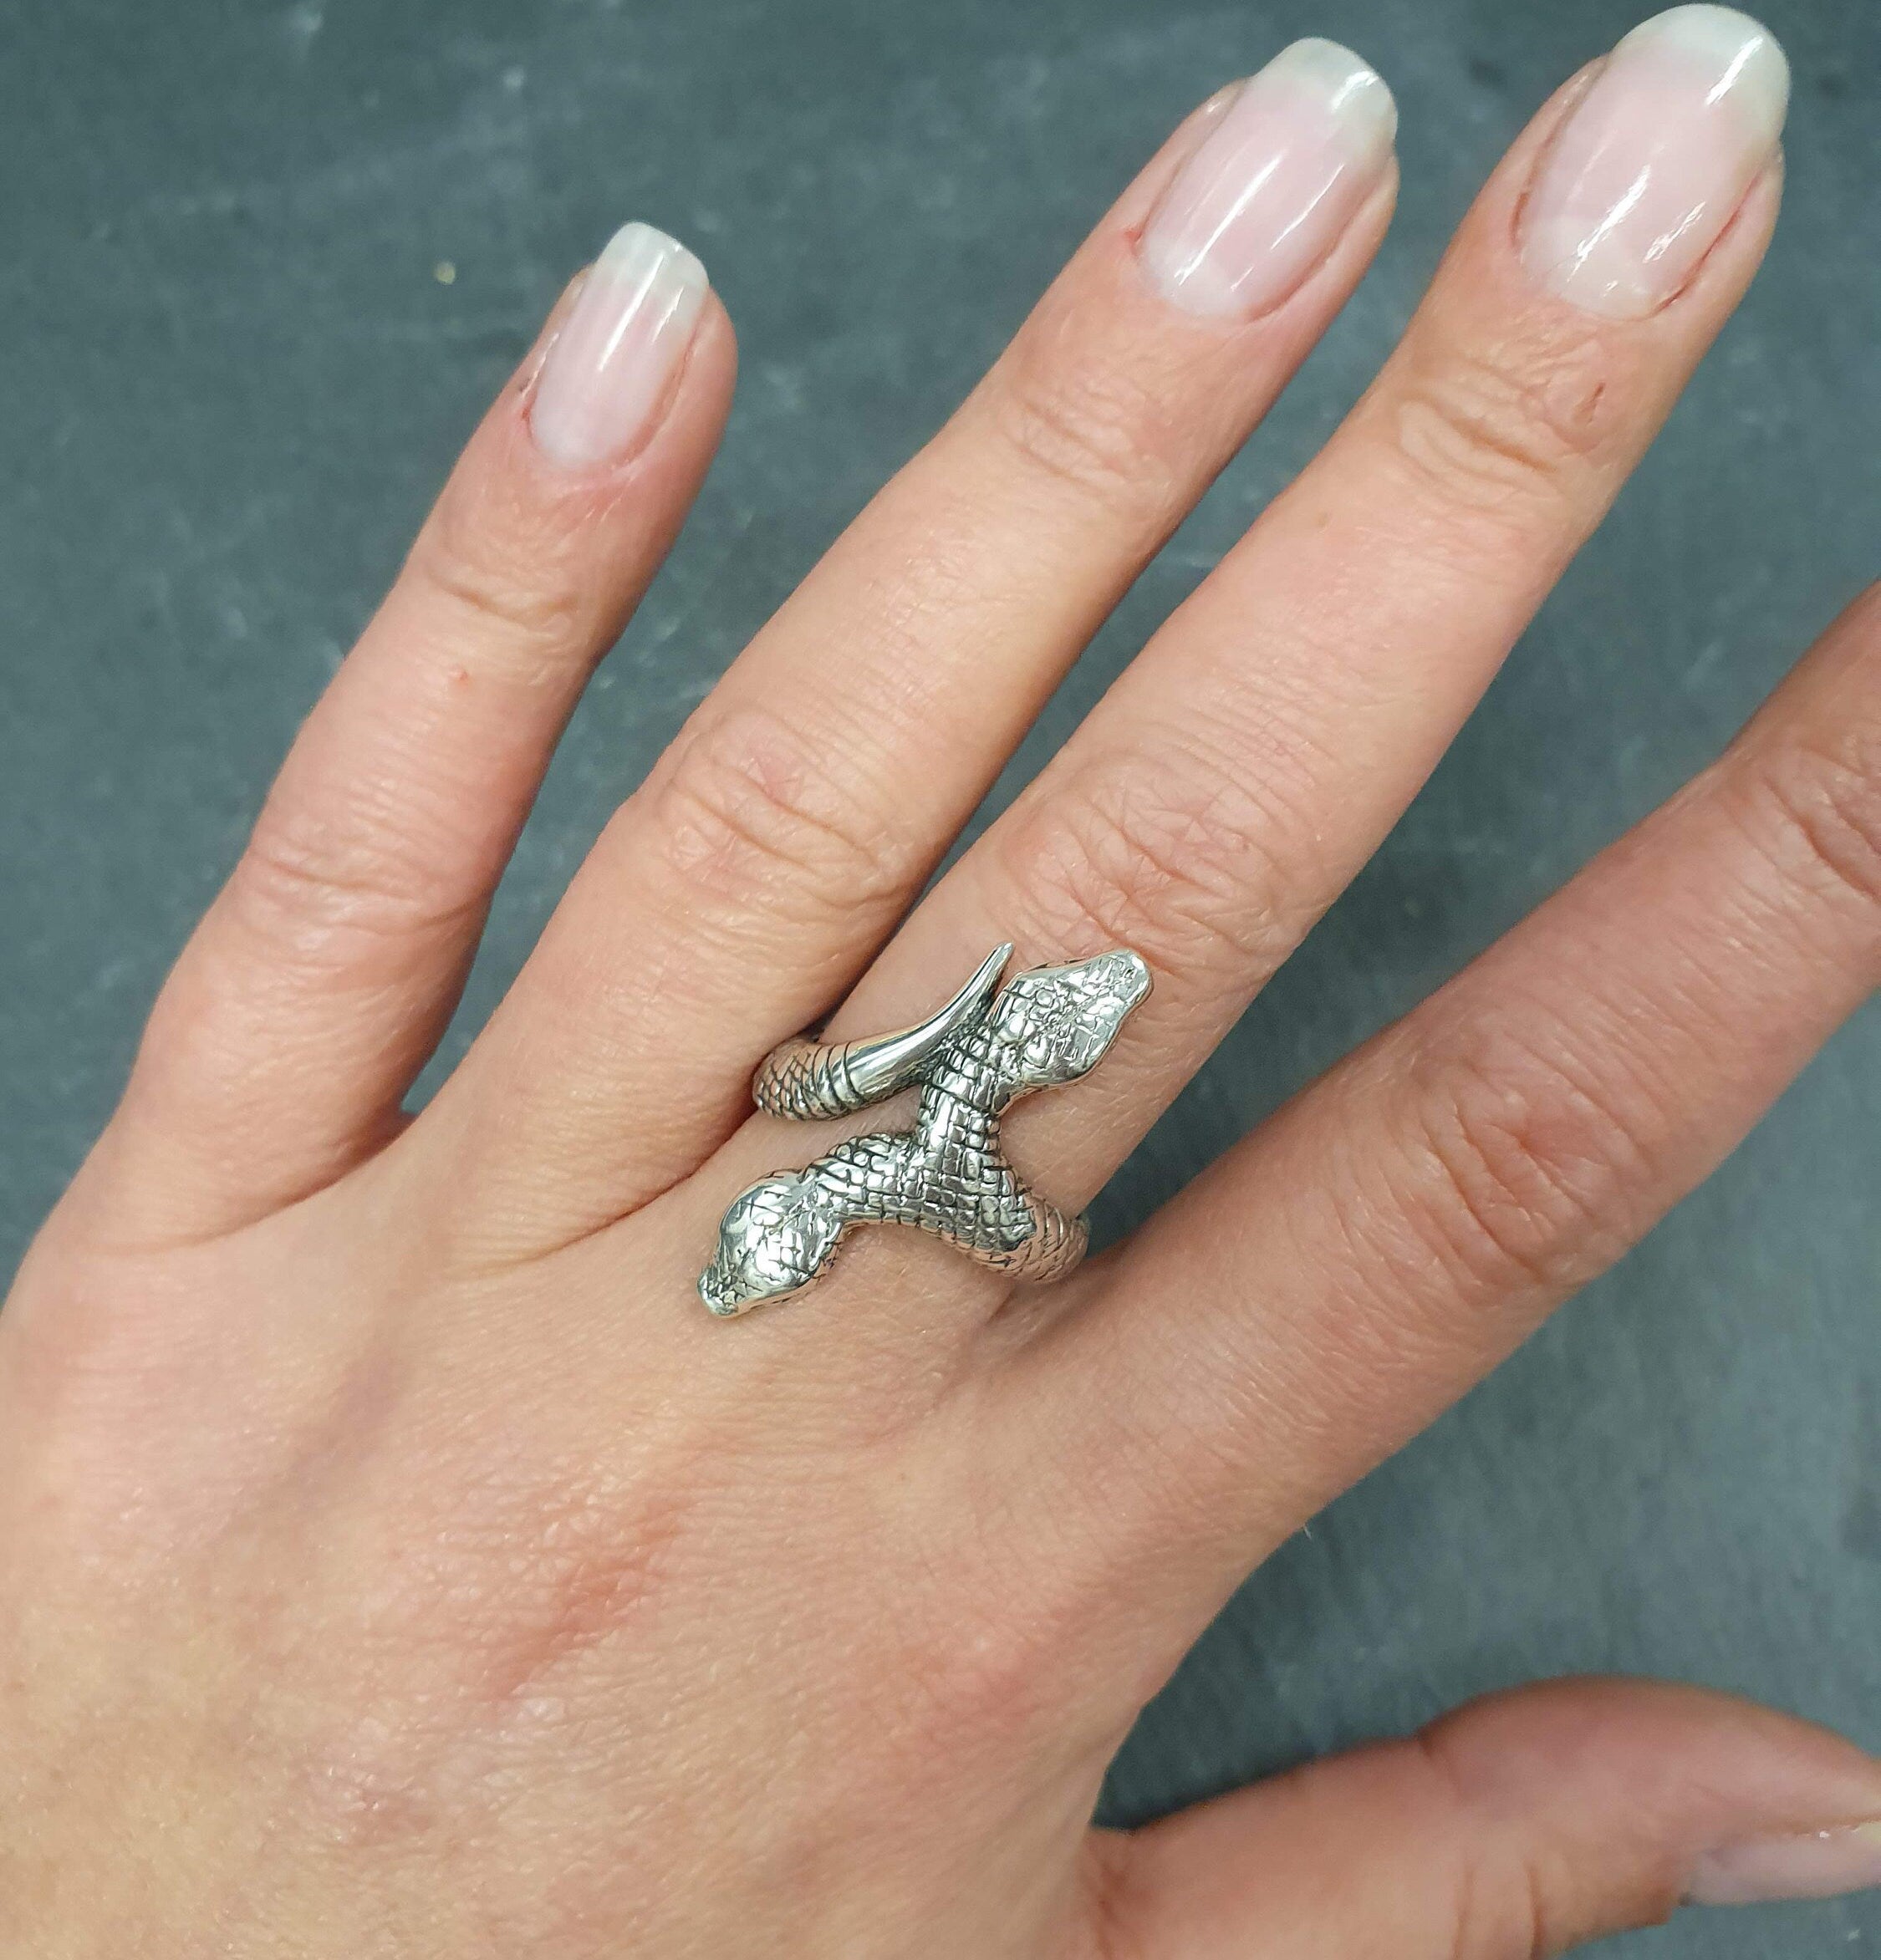 Silver Snake Ring, Long Ring, Serpent Ring, Solid Silver Ring, Two Snakes Ring, Vintage Snake Ring, Snake Head Ring, Python Ring, Statement